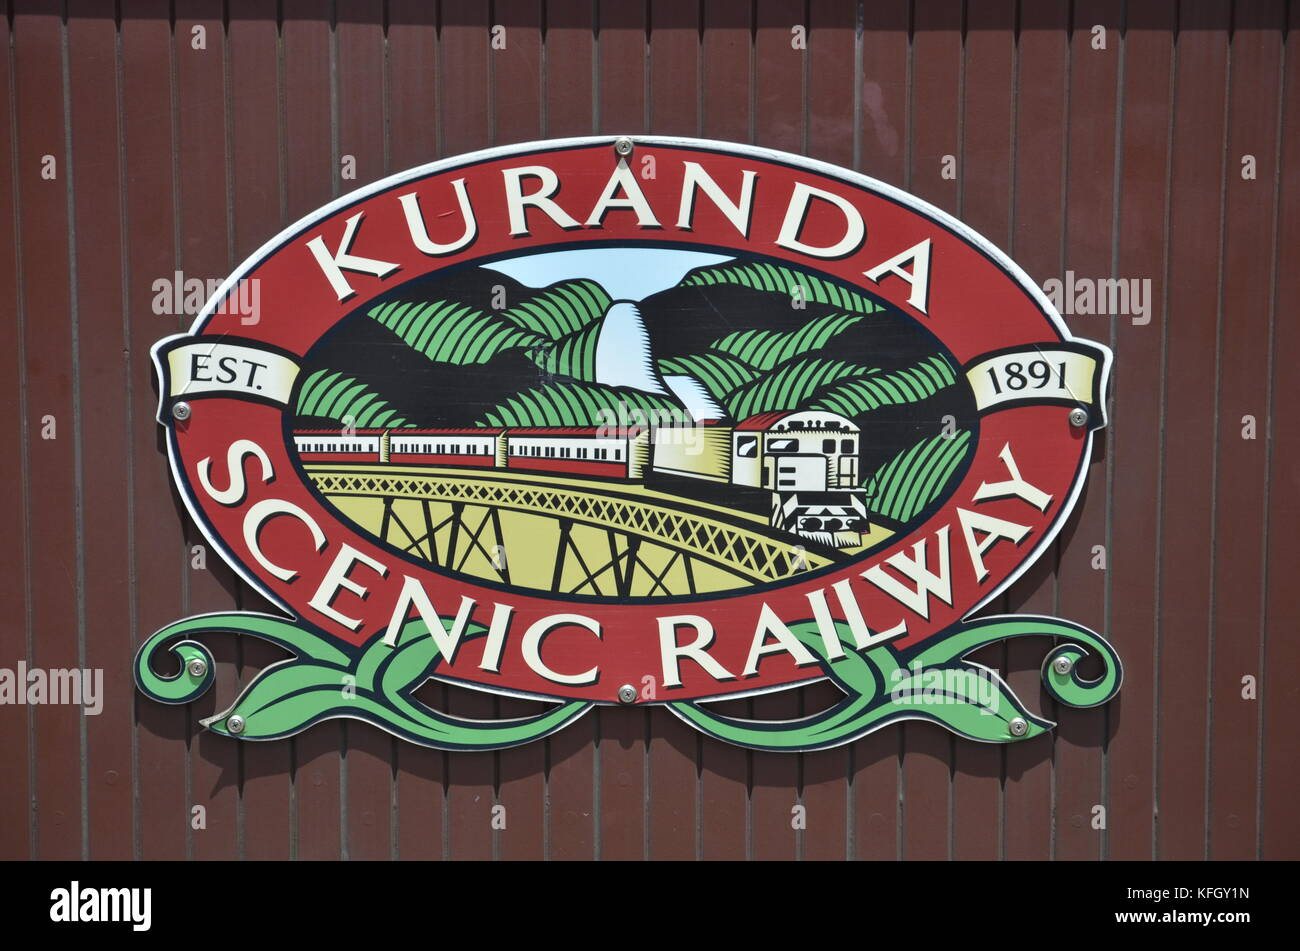 A logo on a carriage on the Kuranda Scenic Railway. Built between 1886 and 1891, the railway connects Cairns to Kuranda via Freshwater in Queensland. Stock Photo